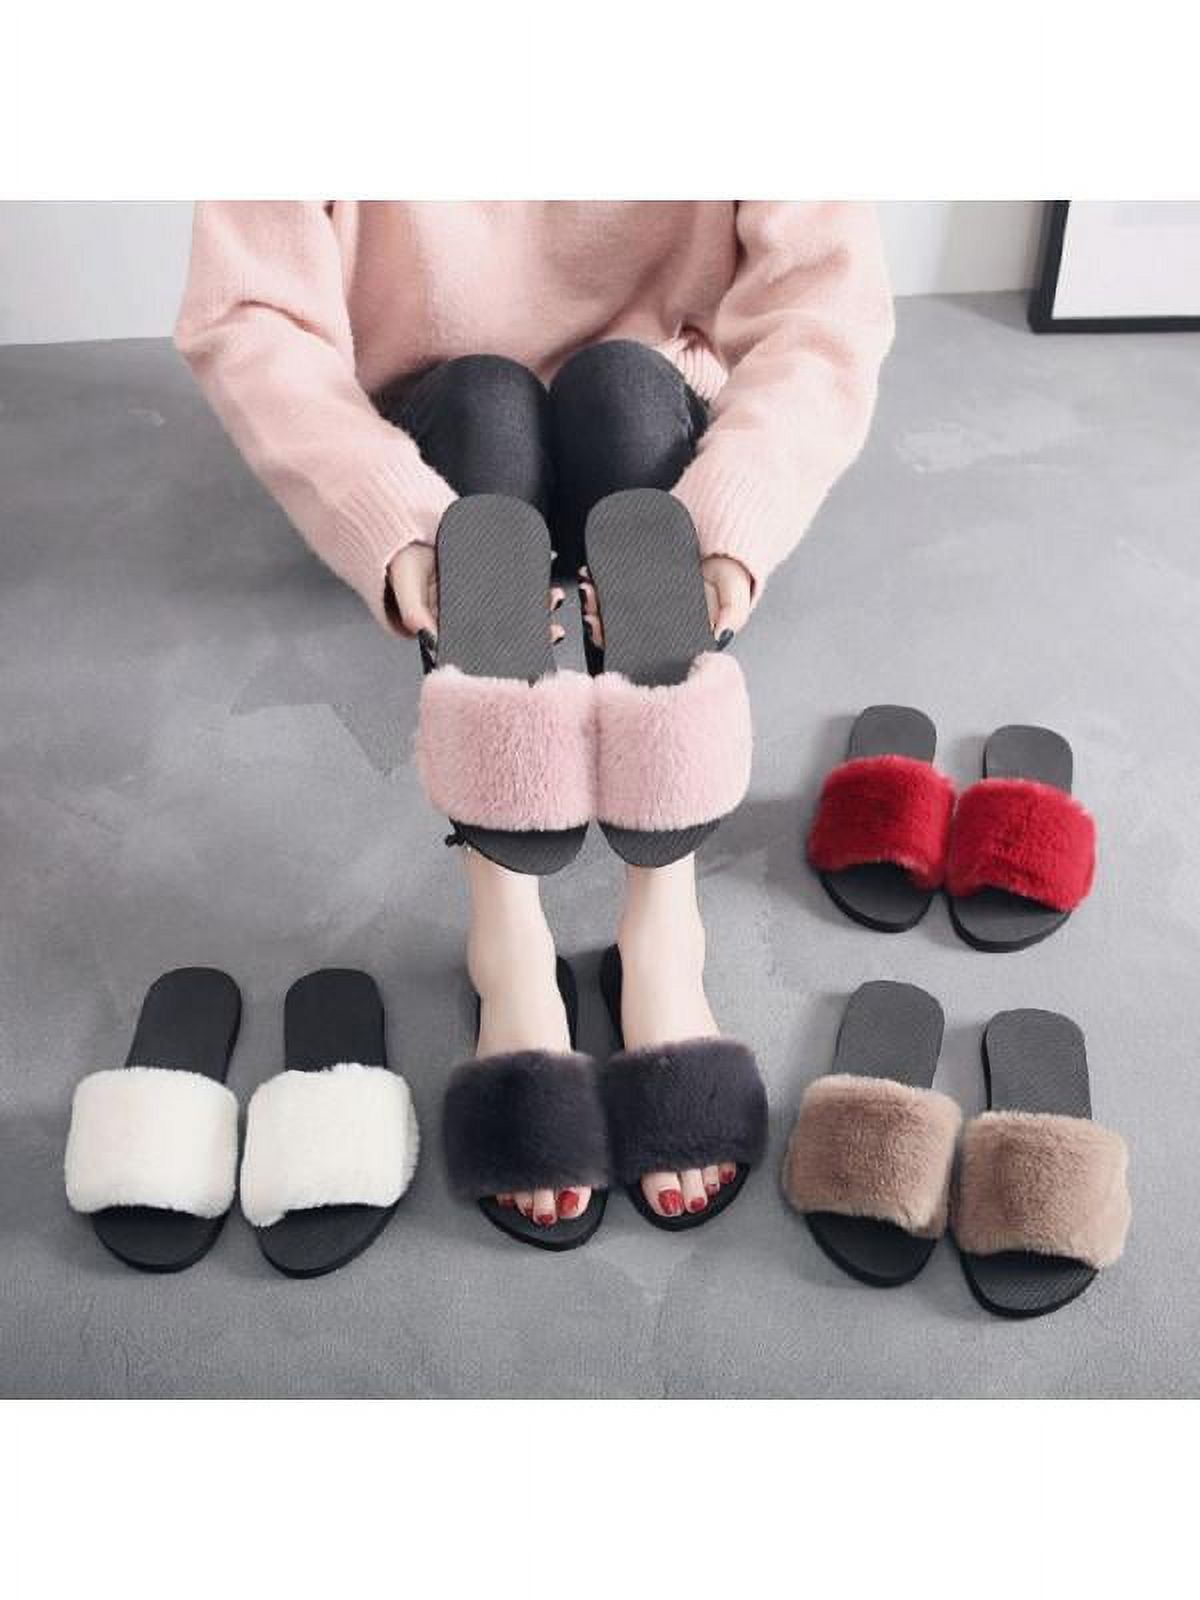 Ropalia Womens Winter Fur Solid Color Slippers Home Anti-Slip Warm Cotton Trailer Shoes Ladies Casual Shoes - image 3 of 3